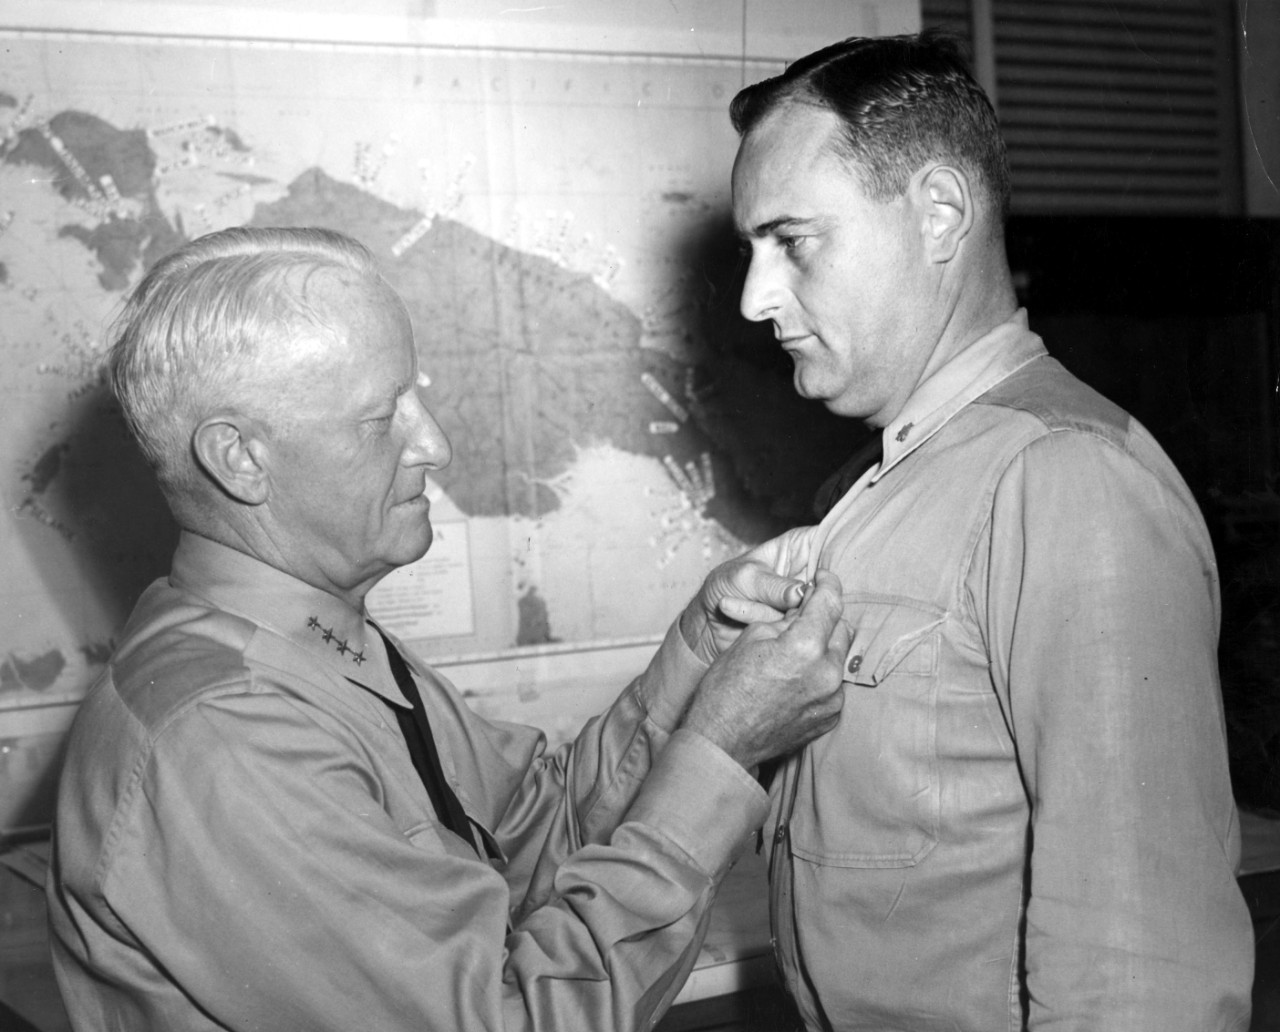 80-G-231835:  Commander T. R. Kurtz, Jr., receives the Navy Commendation Ribbon from Admiral Chester W. Nimitz, USN, at CINCPAC HQ, Pearl Harbor, June 26, 1944.    Commander Kurtz was the Navigator of USS Denver (CL-58) during operations in the Solomons in November 1943, and “contributed materially to the destruction of and damage to enemy ships, aircraft, and shore installations.”   Official U.S. Navy Photograph, now in the collection of the National Archives.  